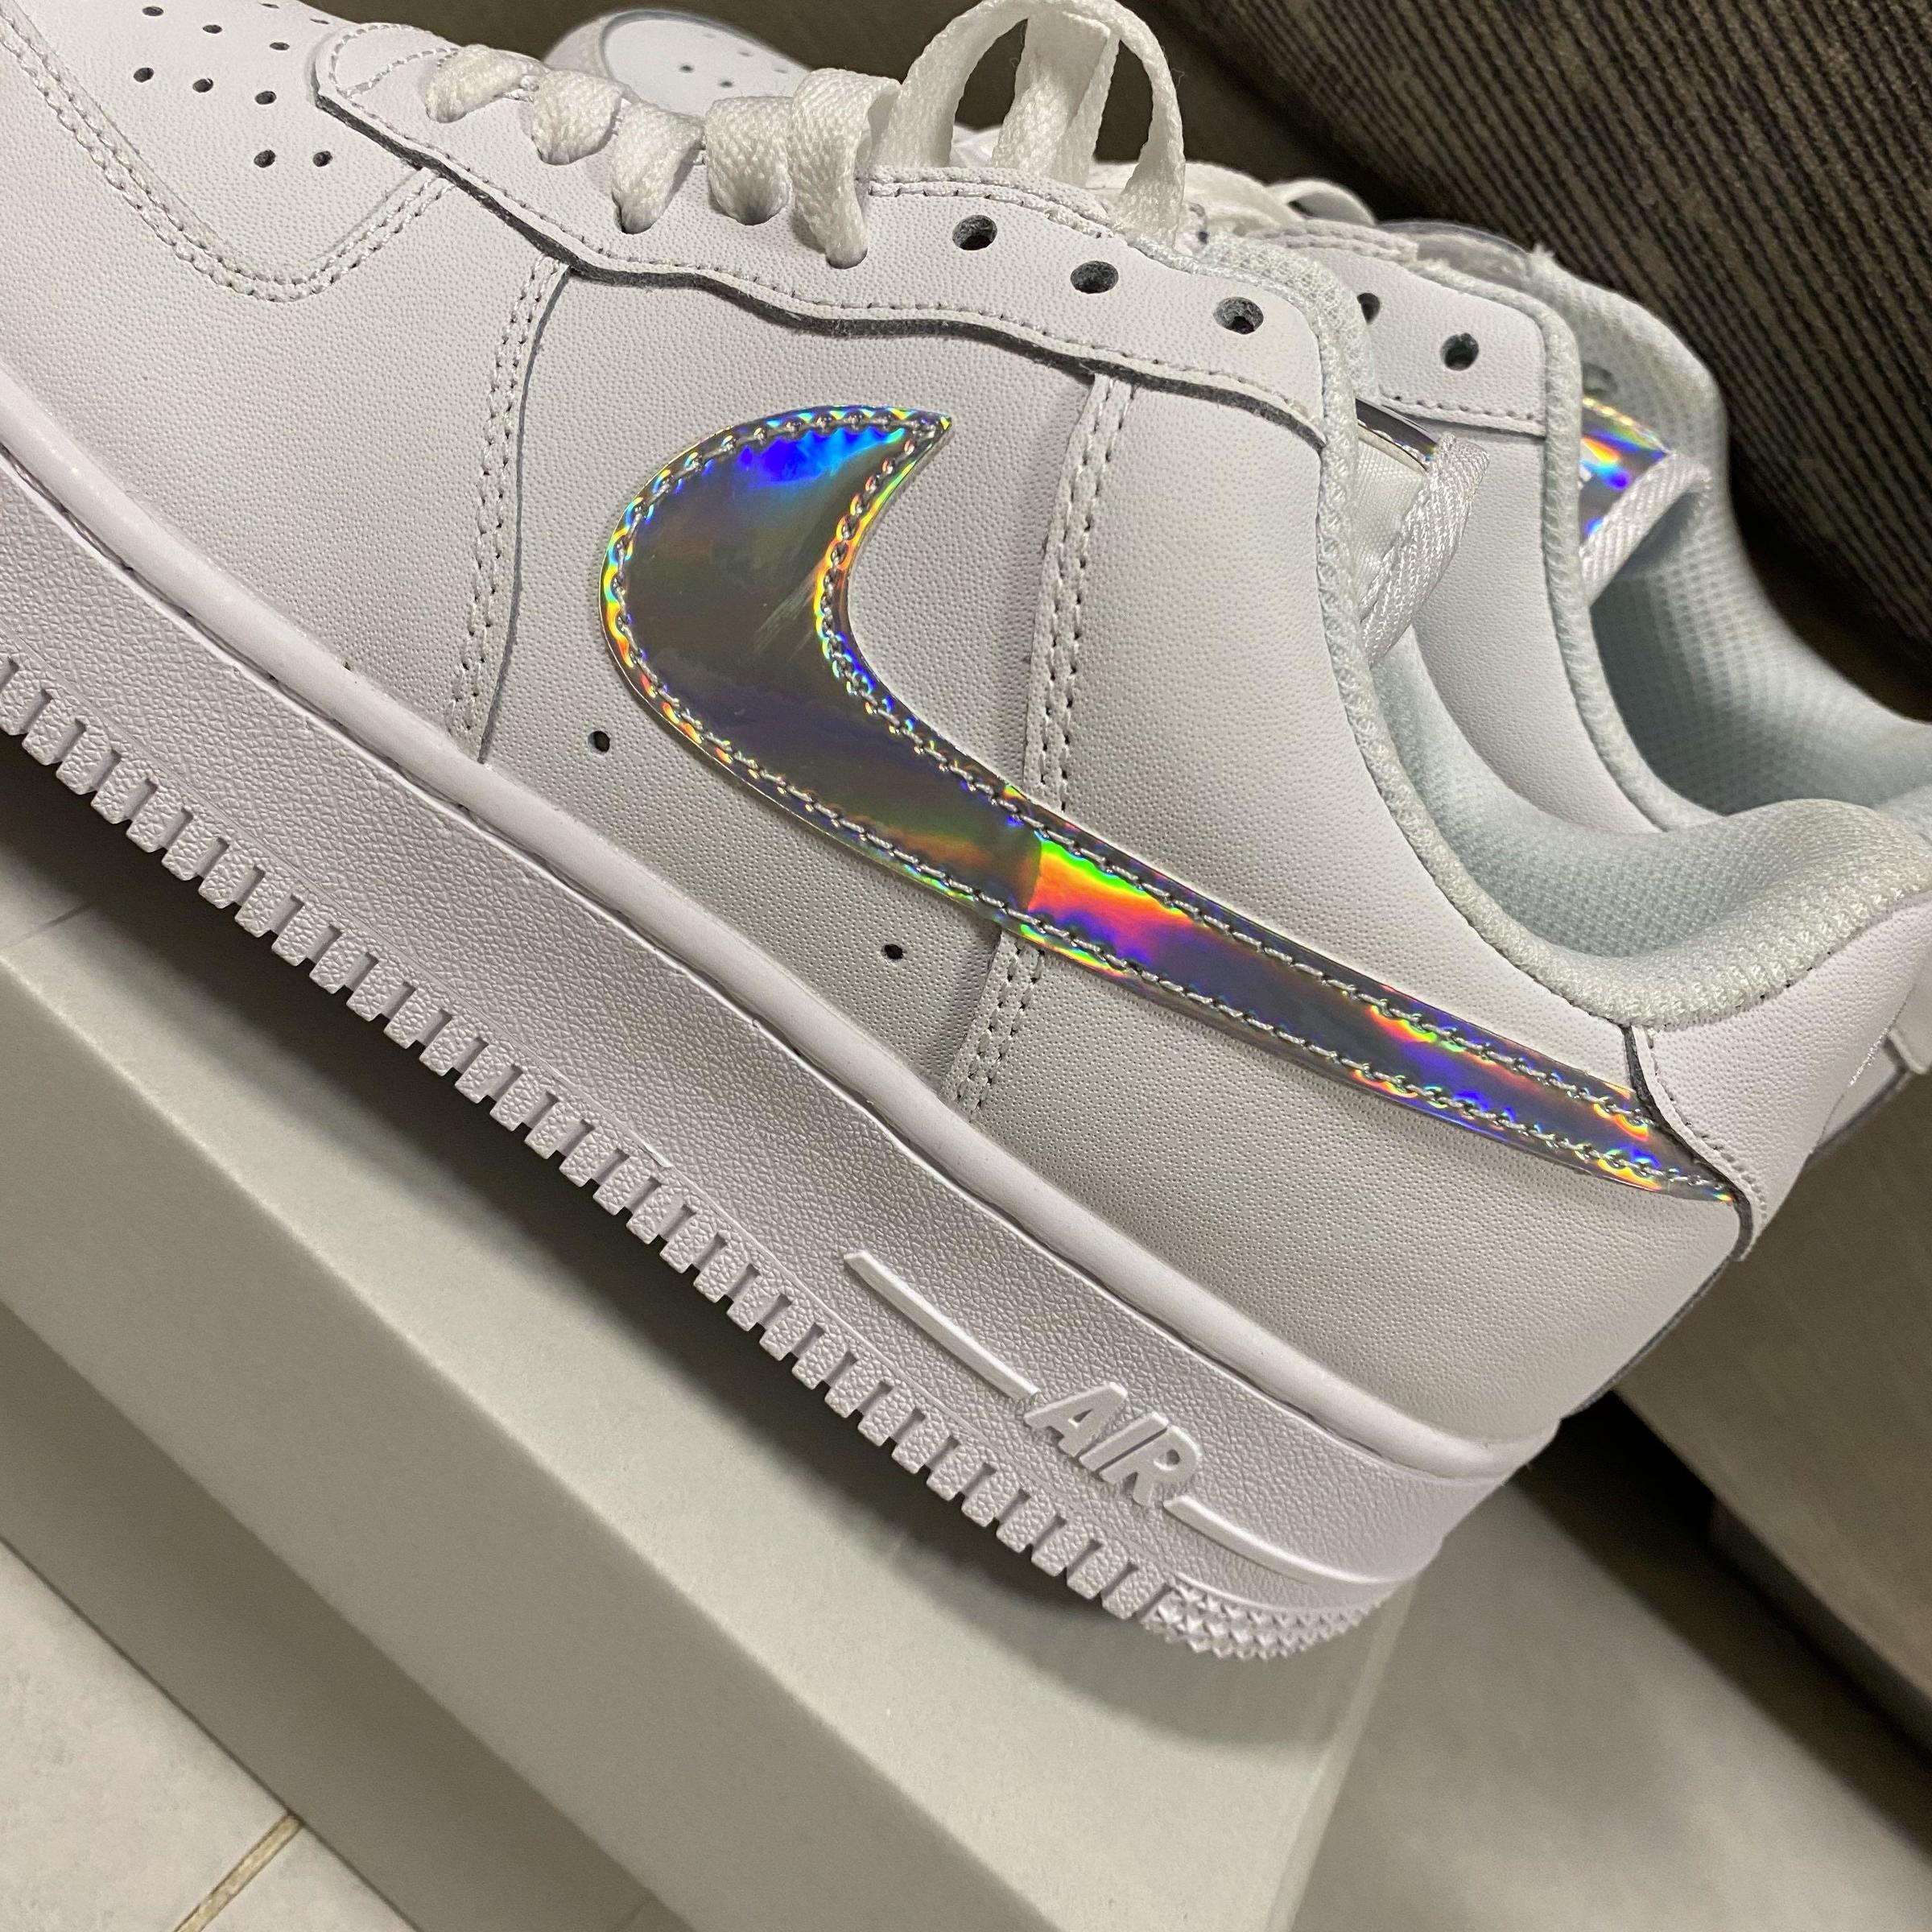 Nike Air Force 1 Holographic Swoosh – shopwith.styleee